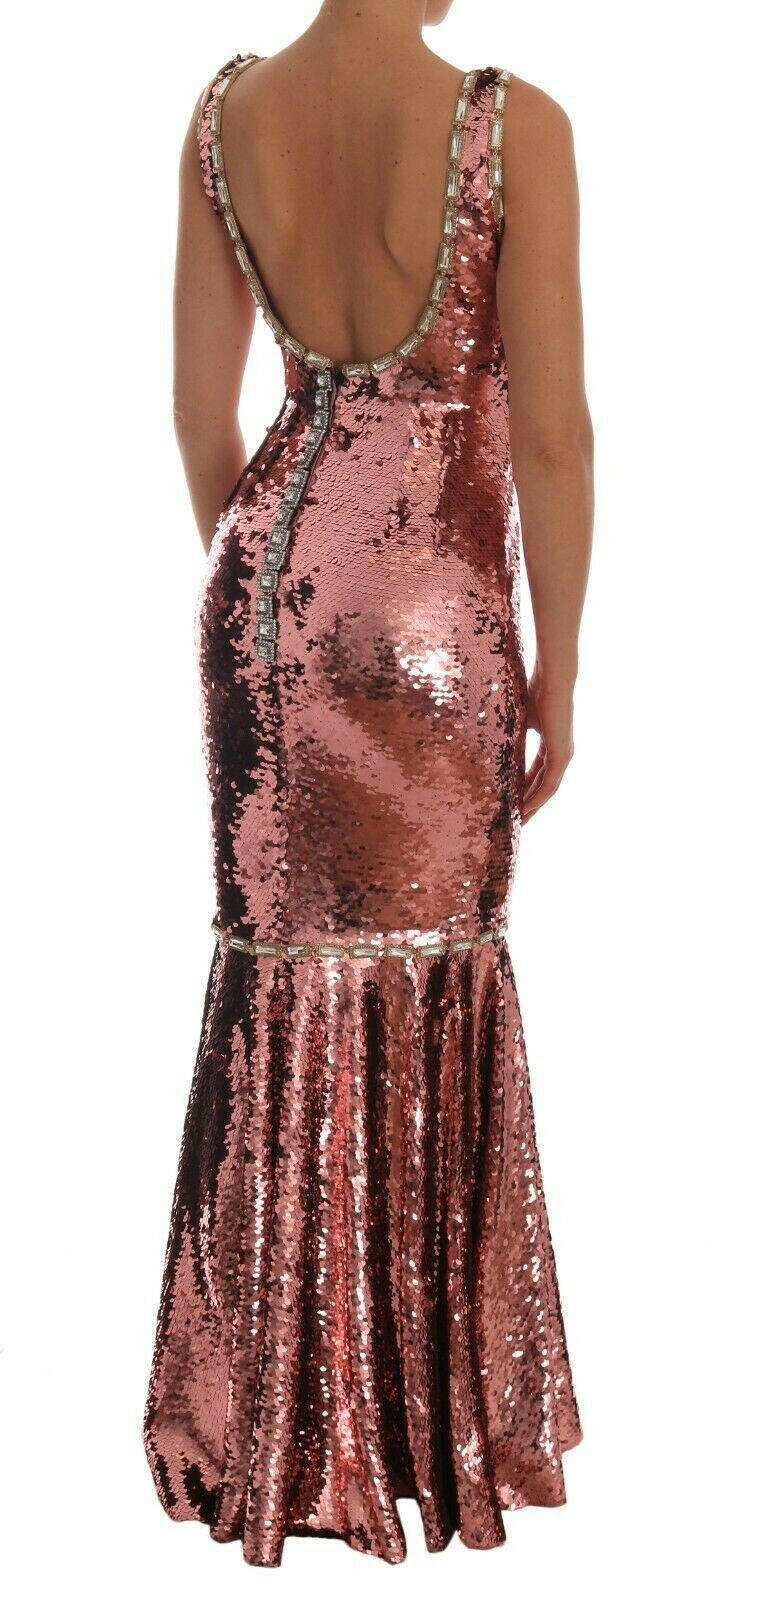 Dolce & Gabbana Pink Sequined Sheath Crystal Dress Gown - GENUINE AUTHENTIC BRAND LLC  